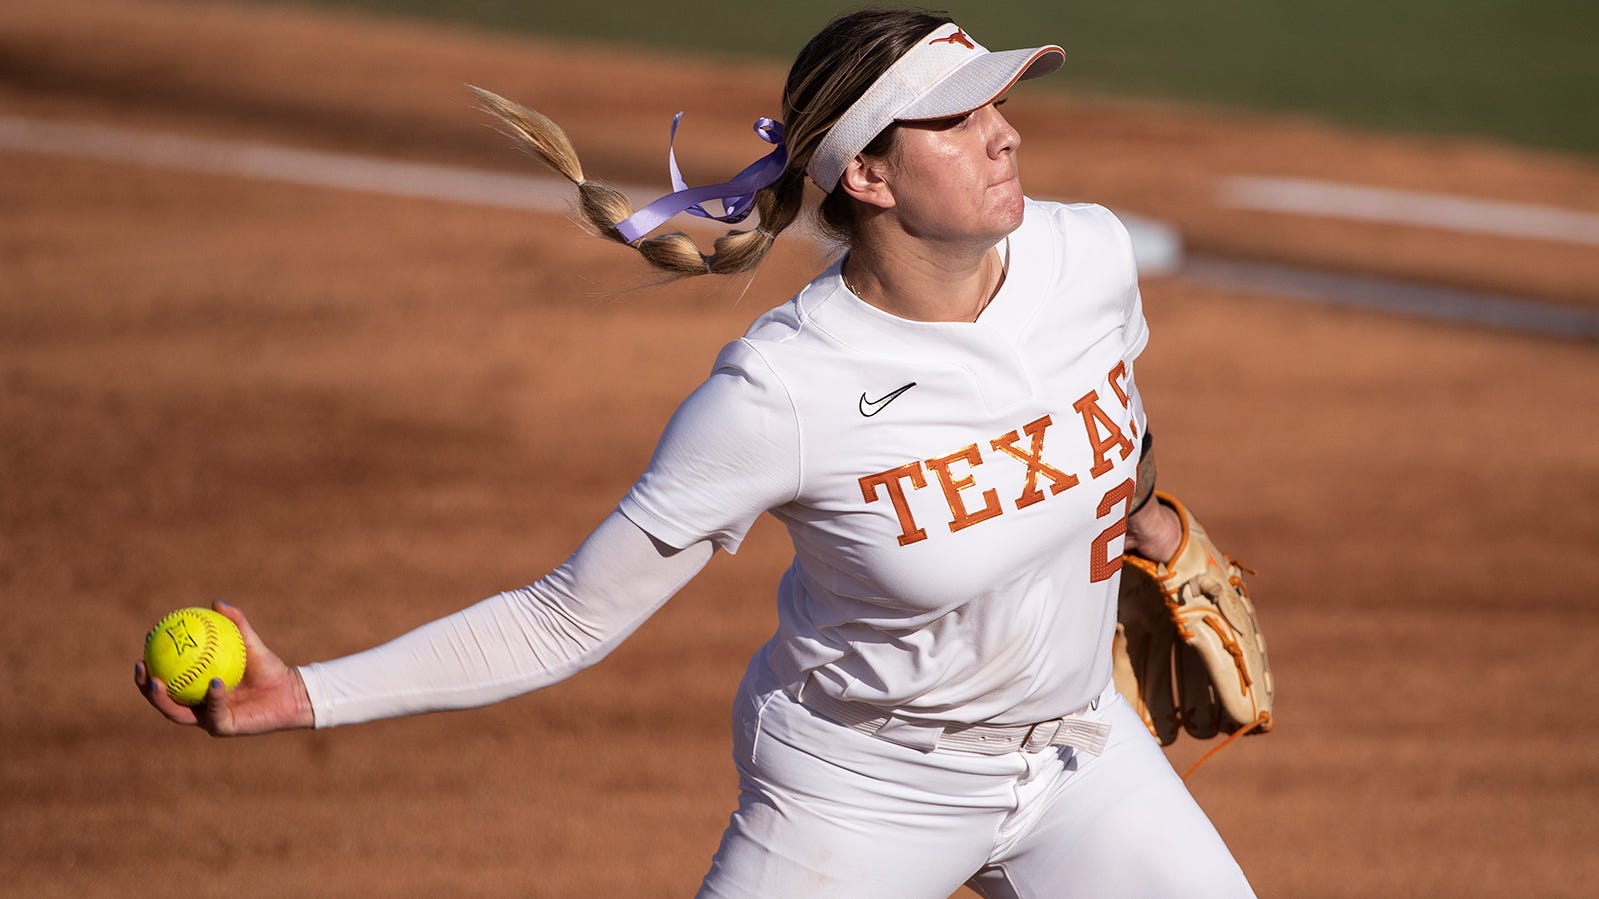 How to watch Texas softball in the WCWS, view the bracket and schedule